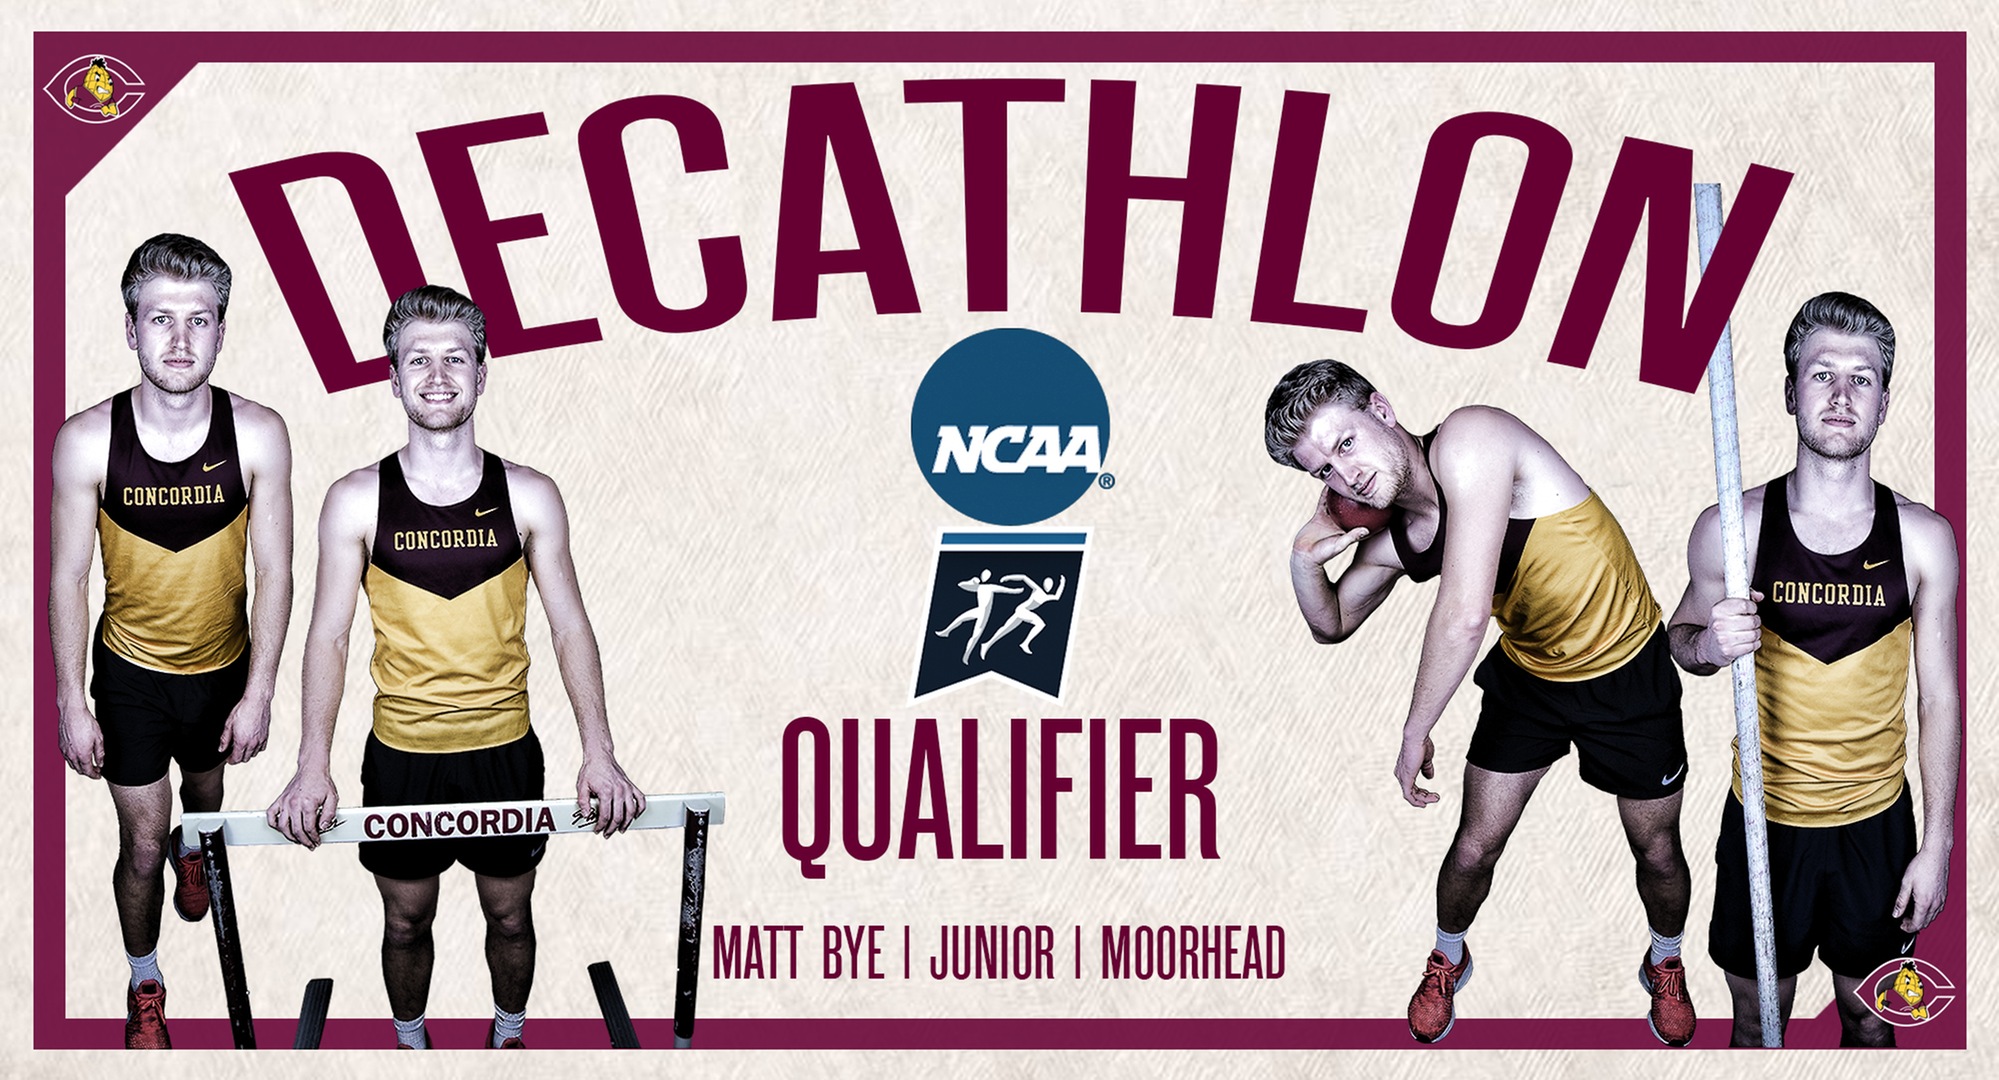 Matt Bye qualified for his second straight NCAA National Outdoor Meet in the decathlon.